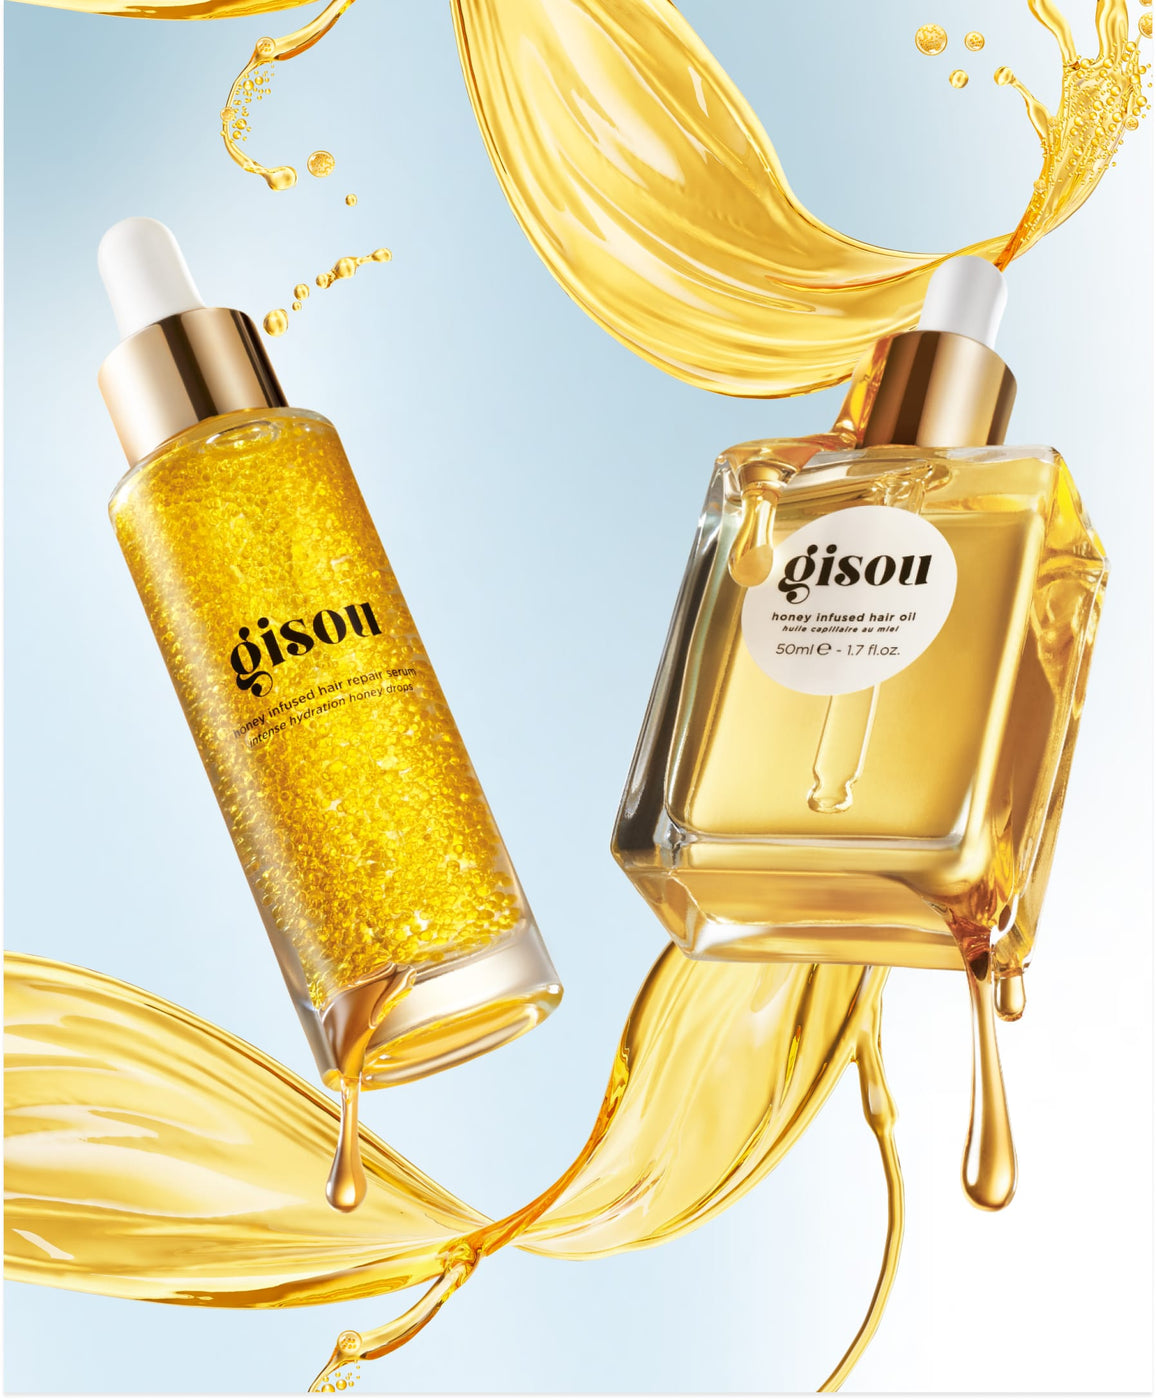 An image of the hair repair serum and an image of the iconic hair oil